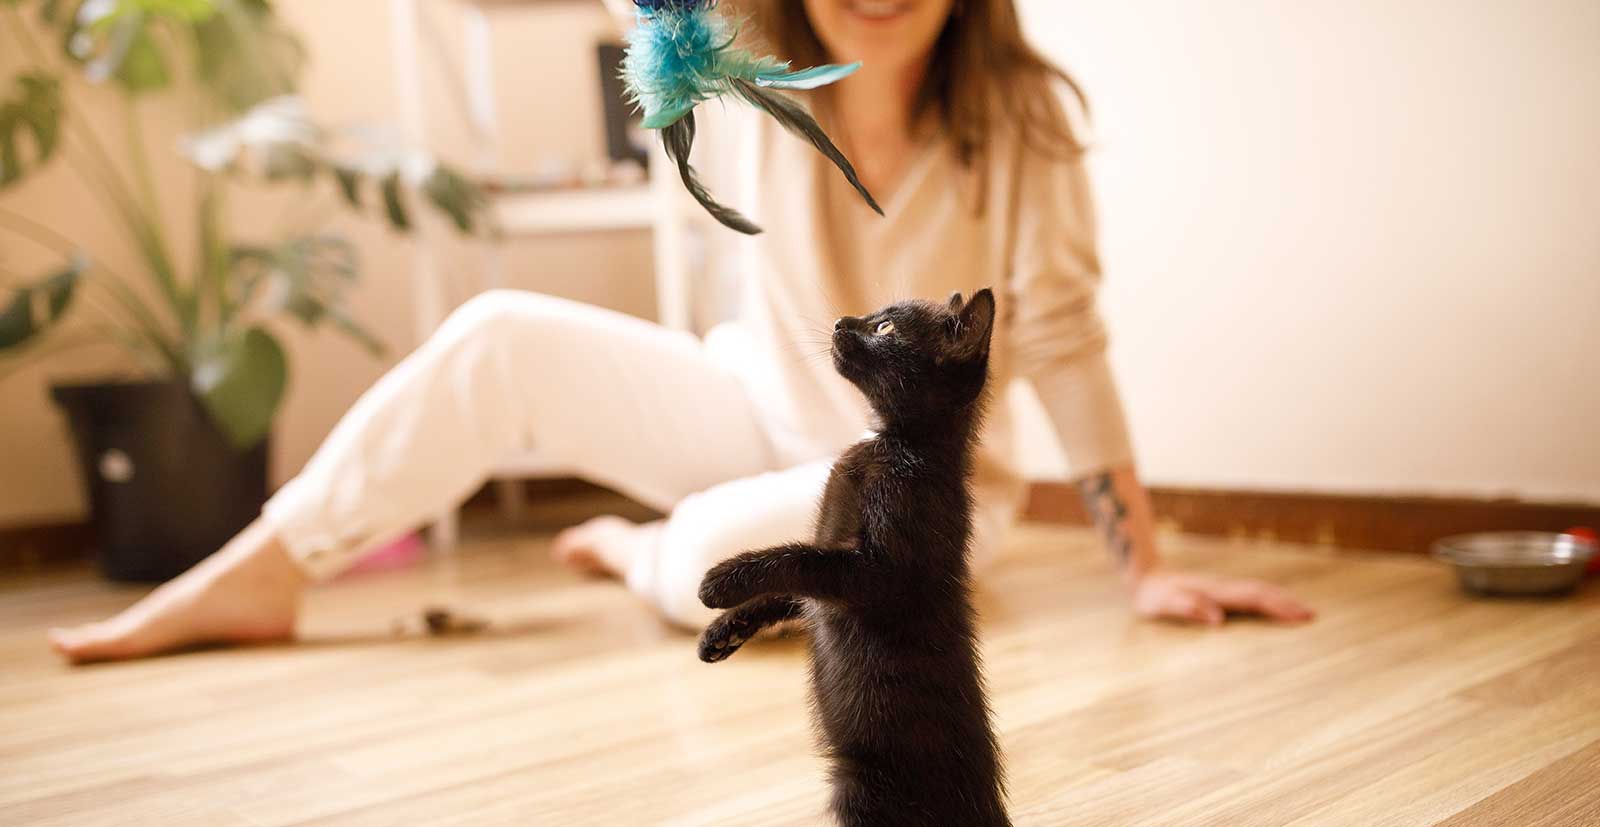 A brown kitten playing with a feather toy